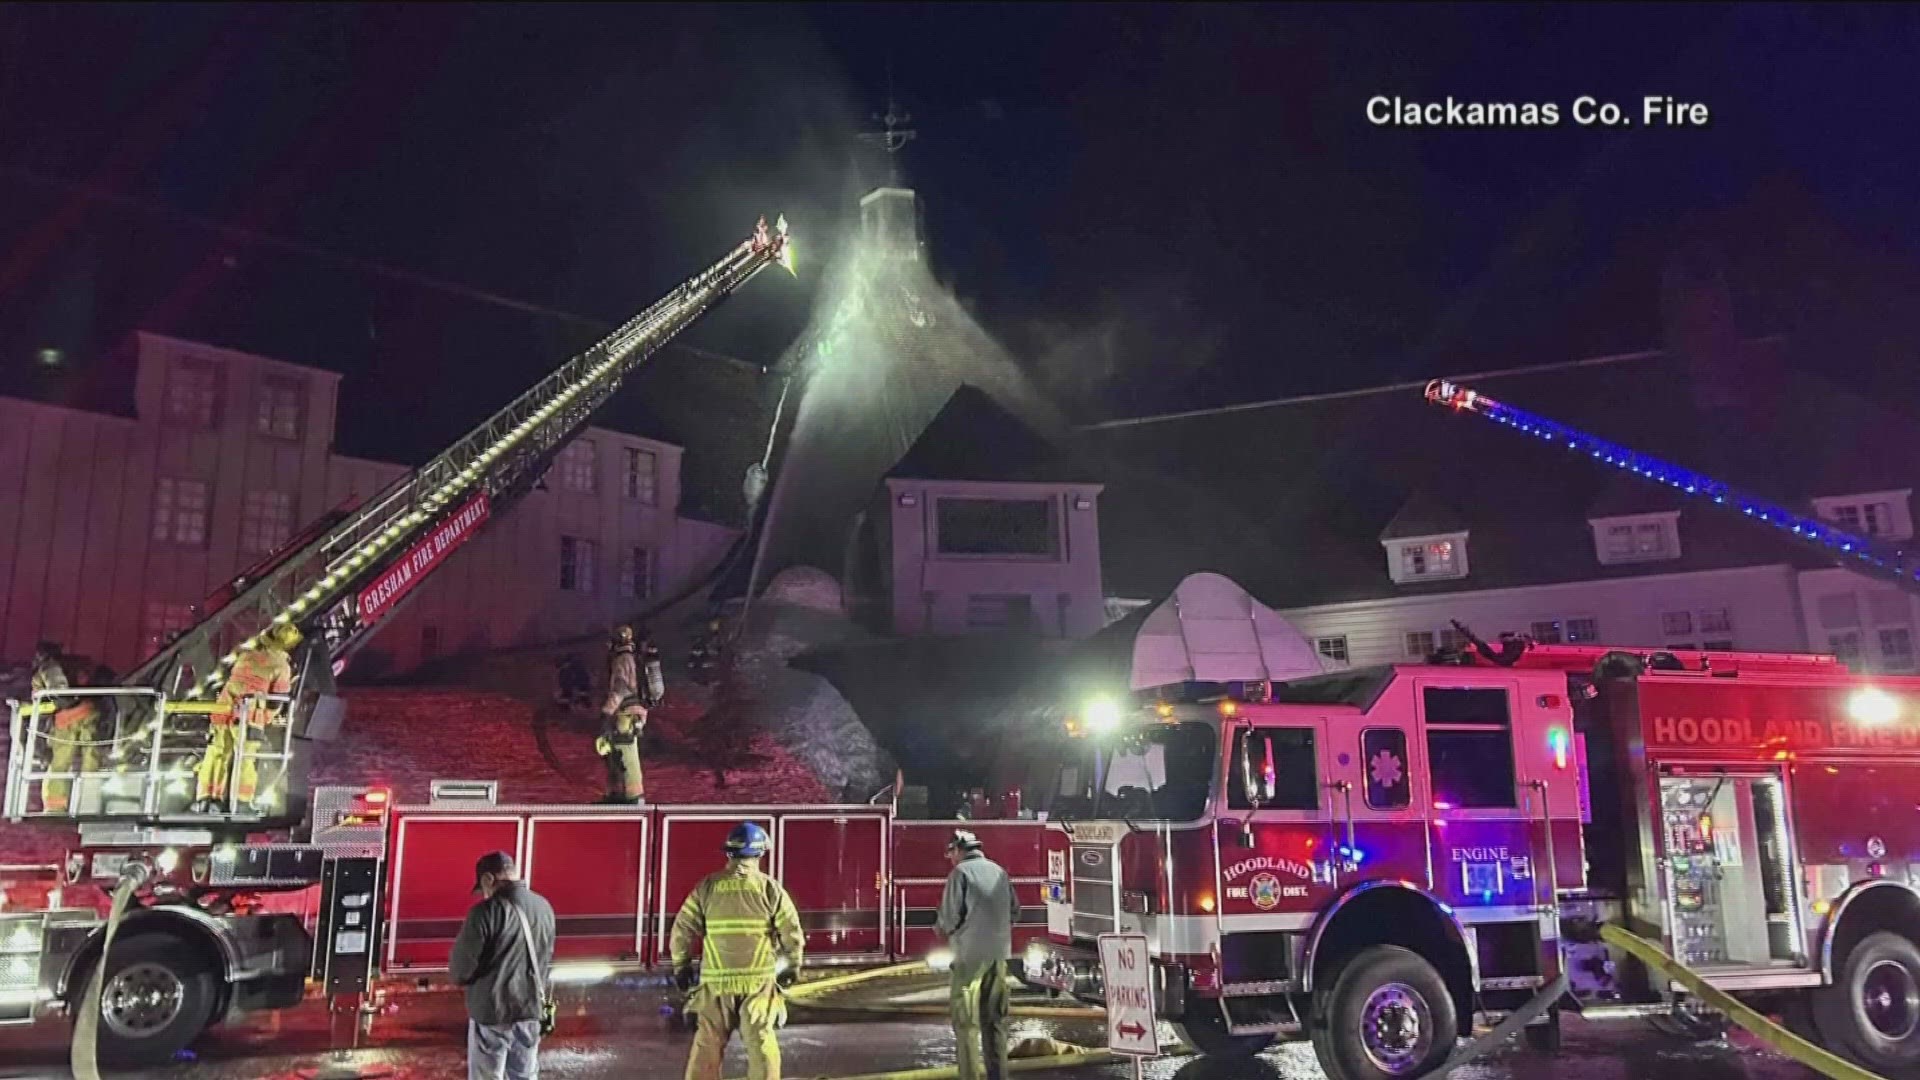 Officials stated the fire broke out in the attic of the Timberline Lodge on the south slope of Mount Hood in Oregon.